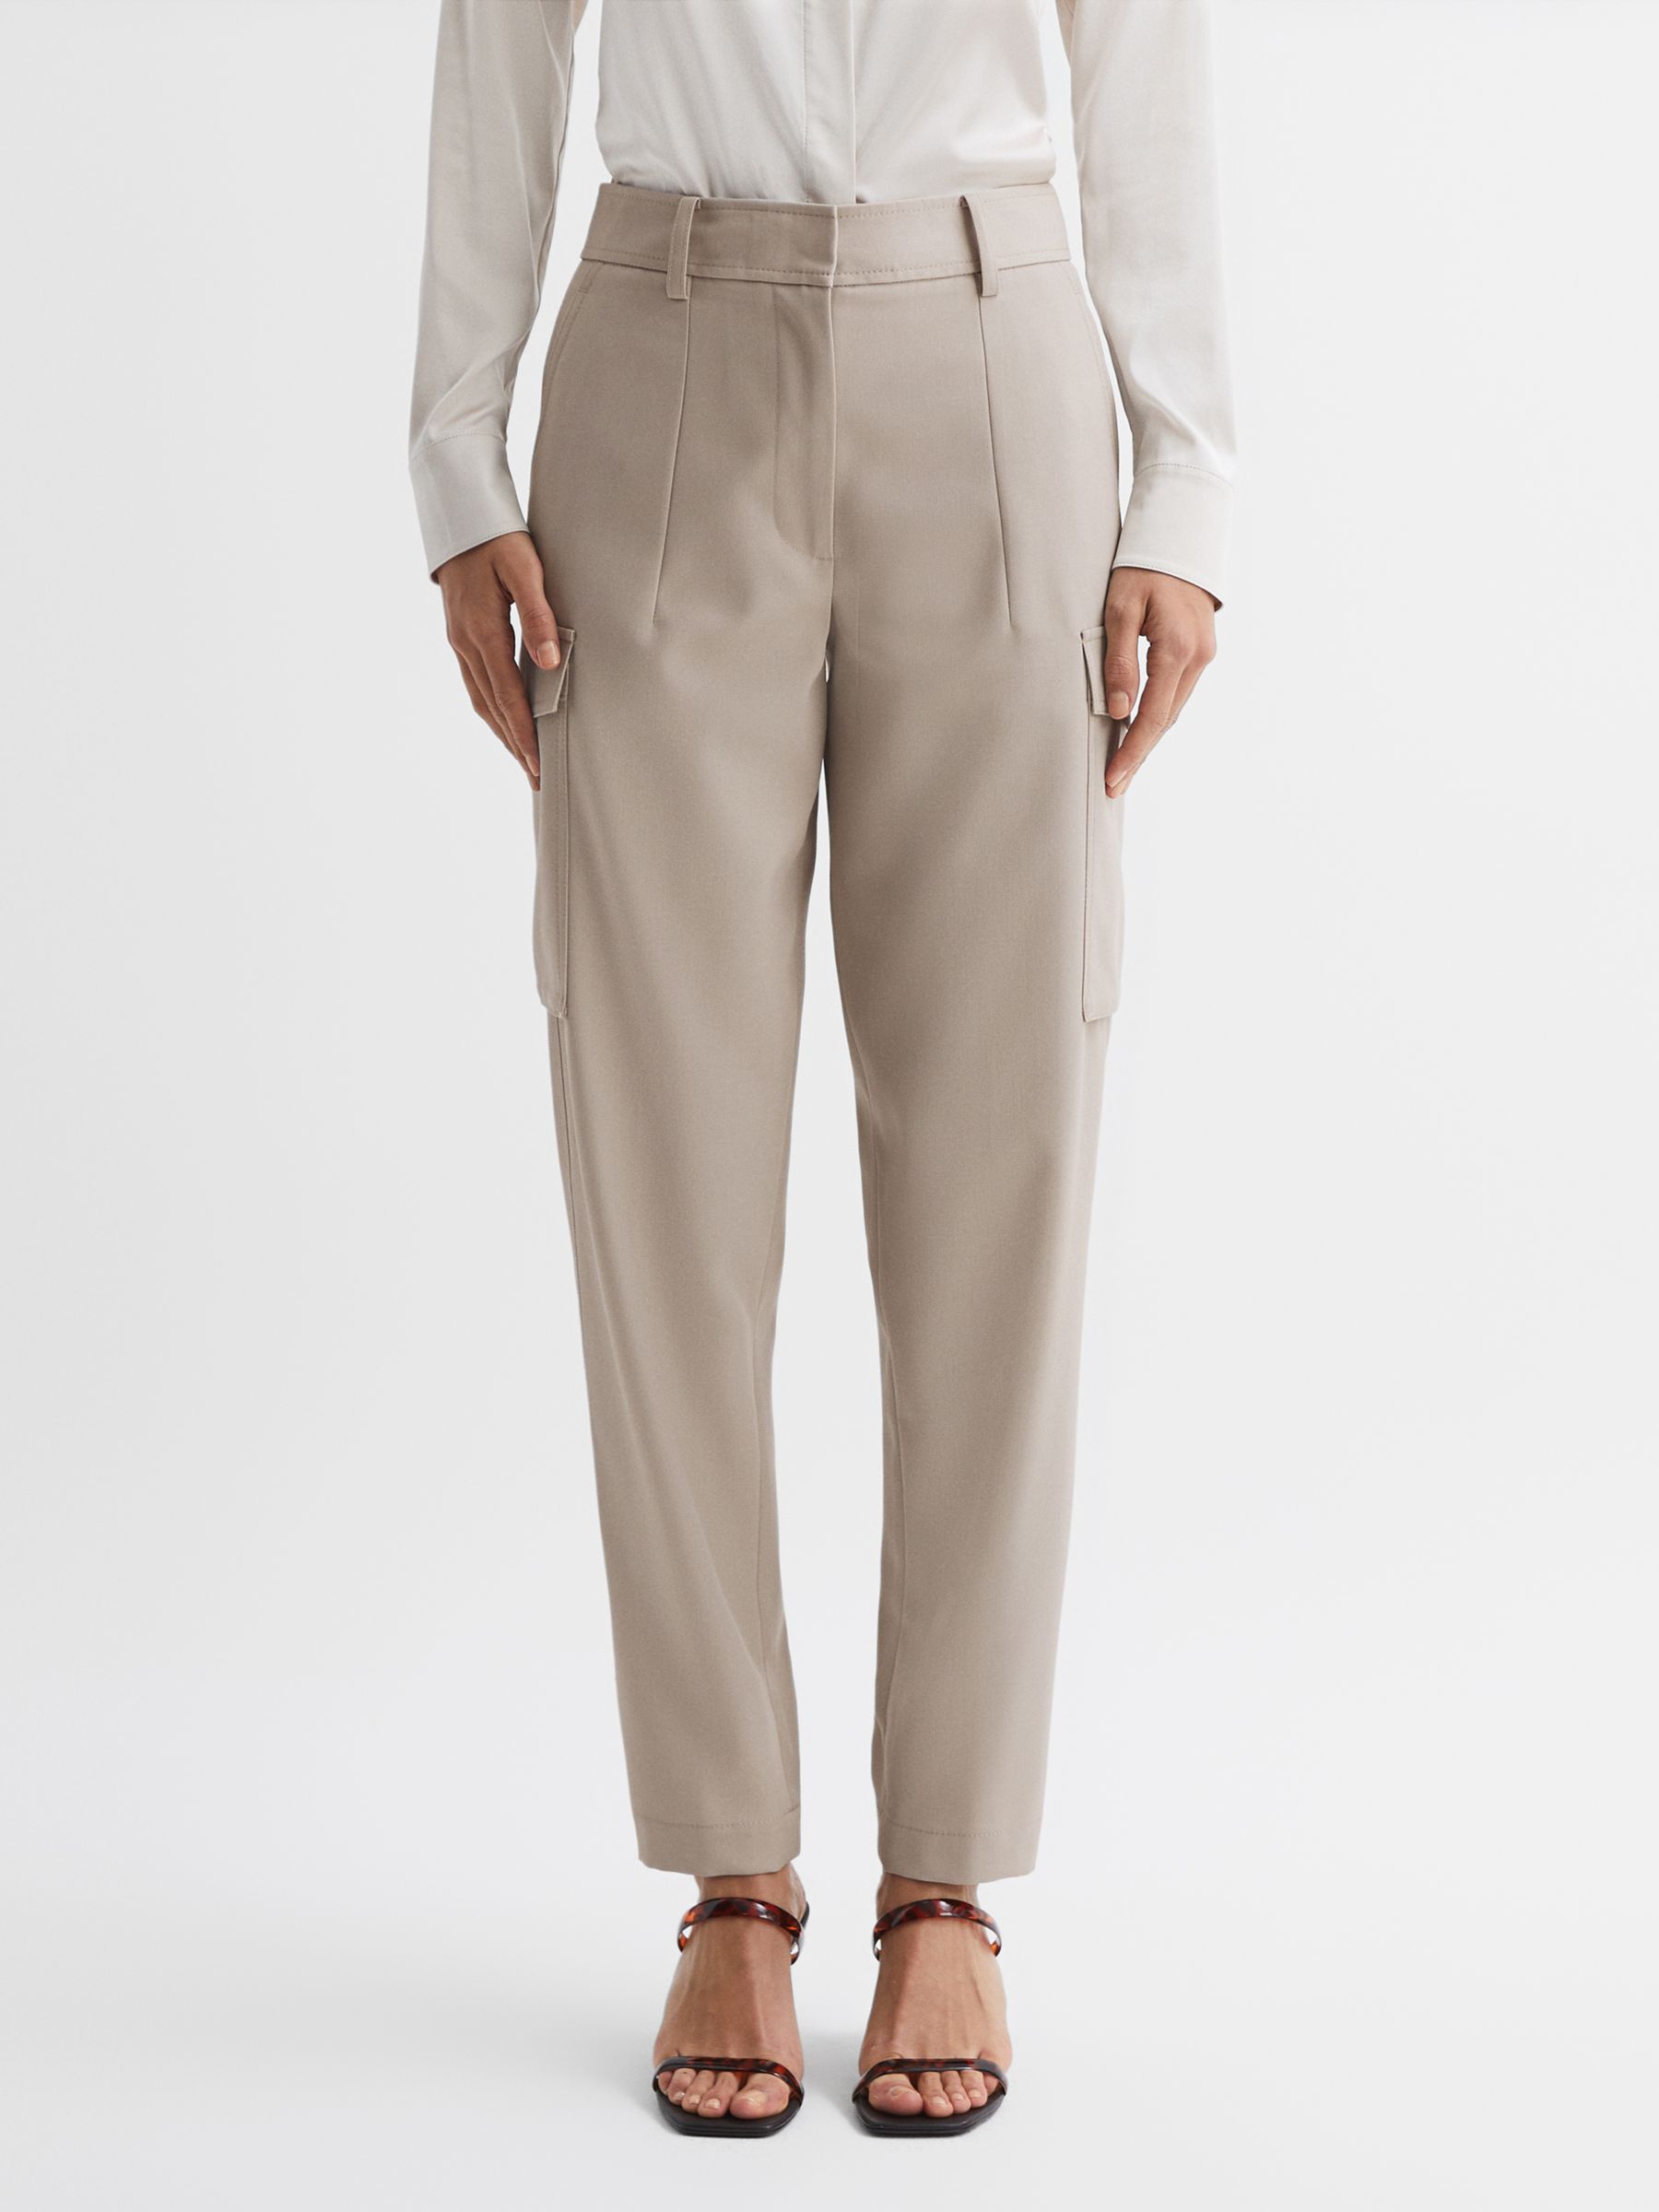 Reiss Violet Wool Blend Cargo Trousers, Neutral at John Lewis & Partners